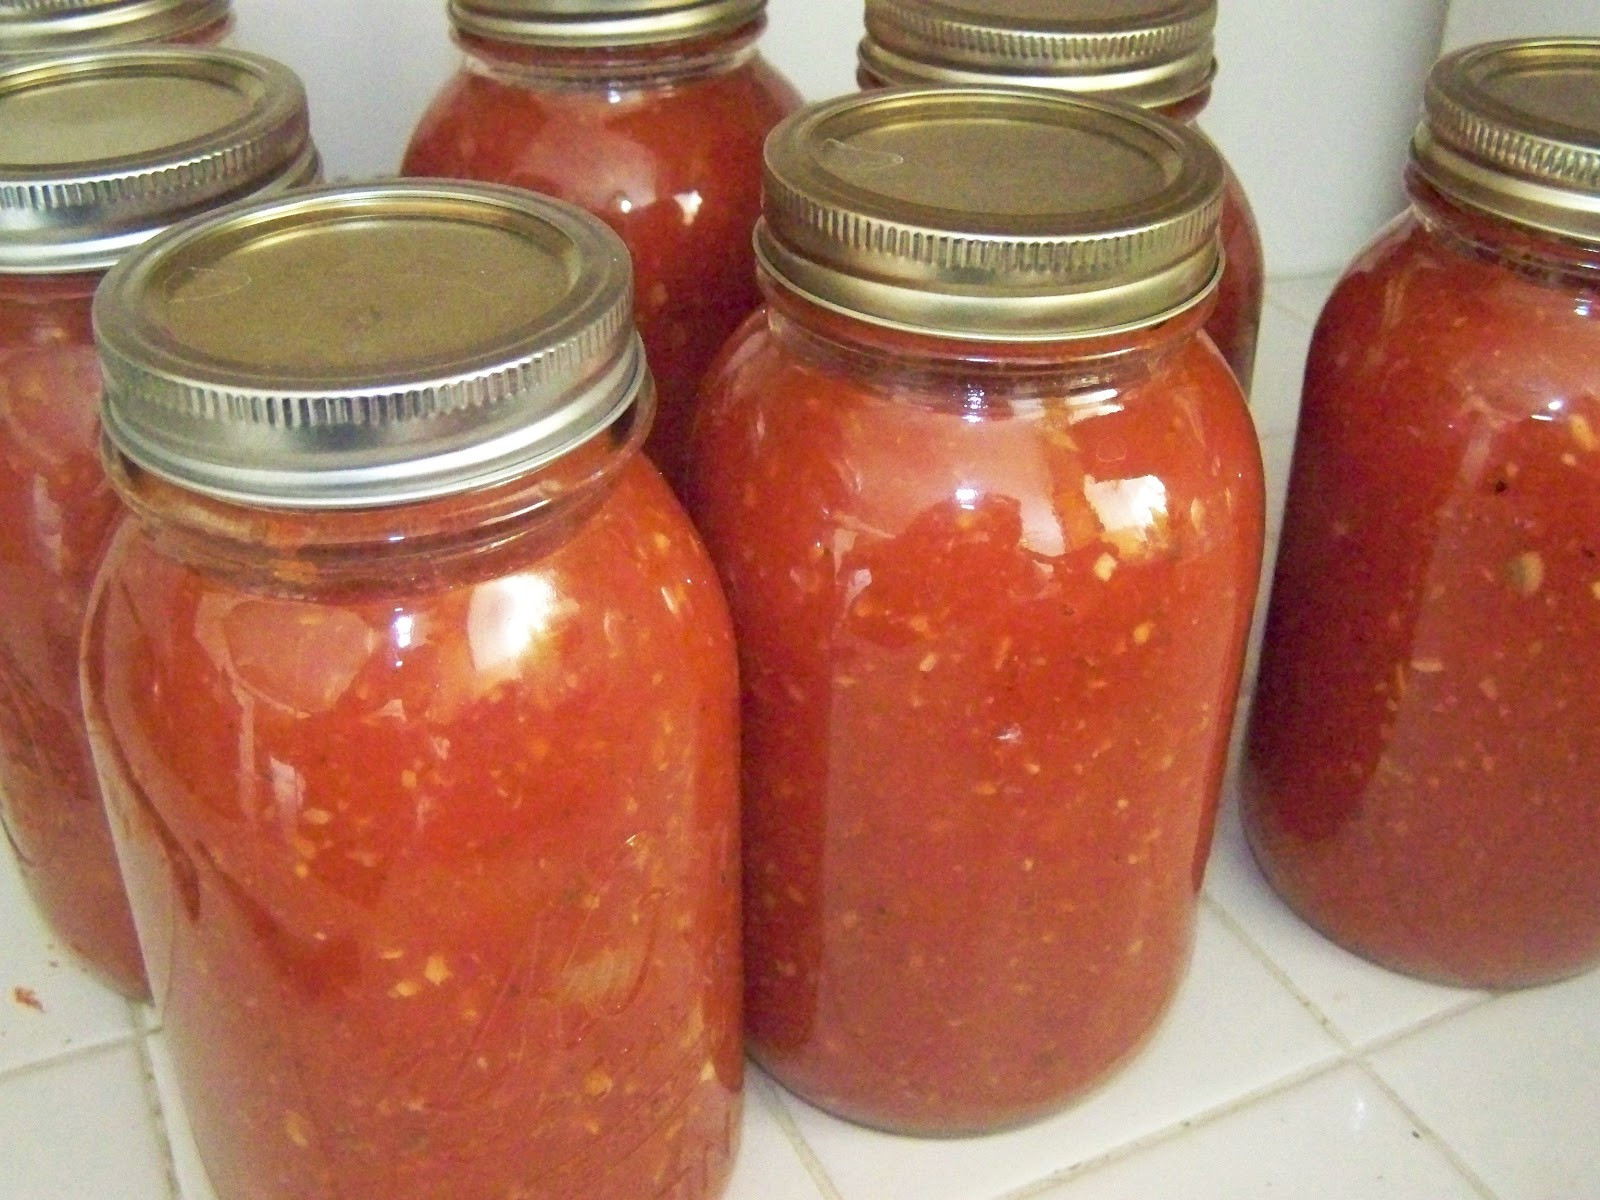 Home Canning Spaghetti Sauce Recipes
 A to Z for Moms Like Me Canning Homemade Spaghetti Sauce